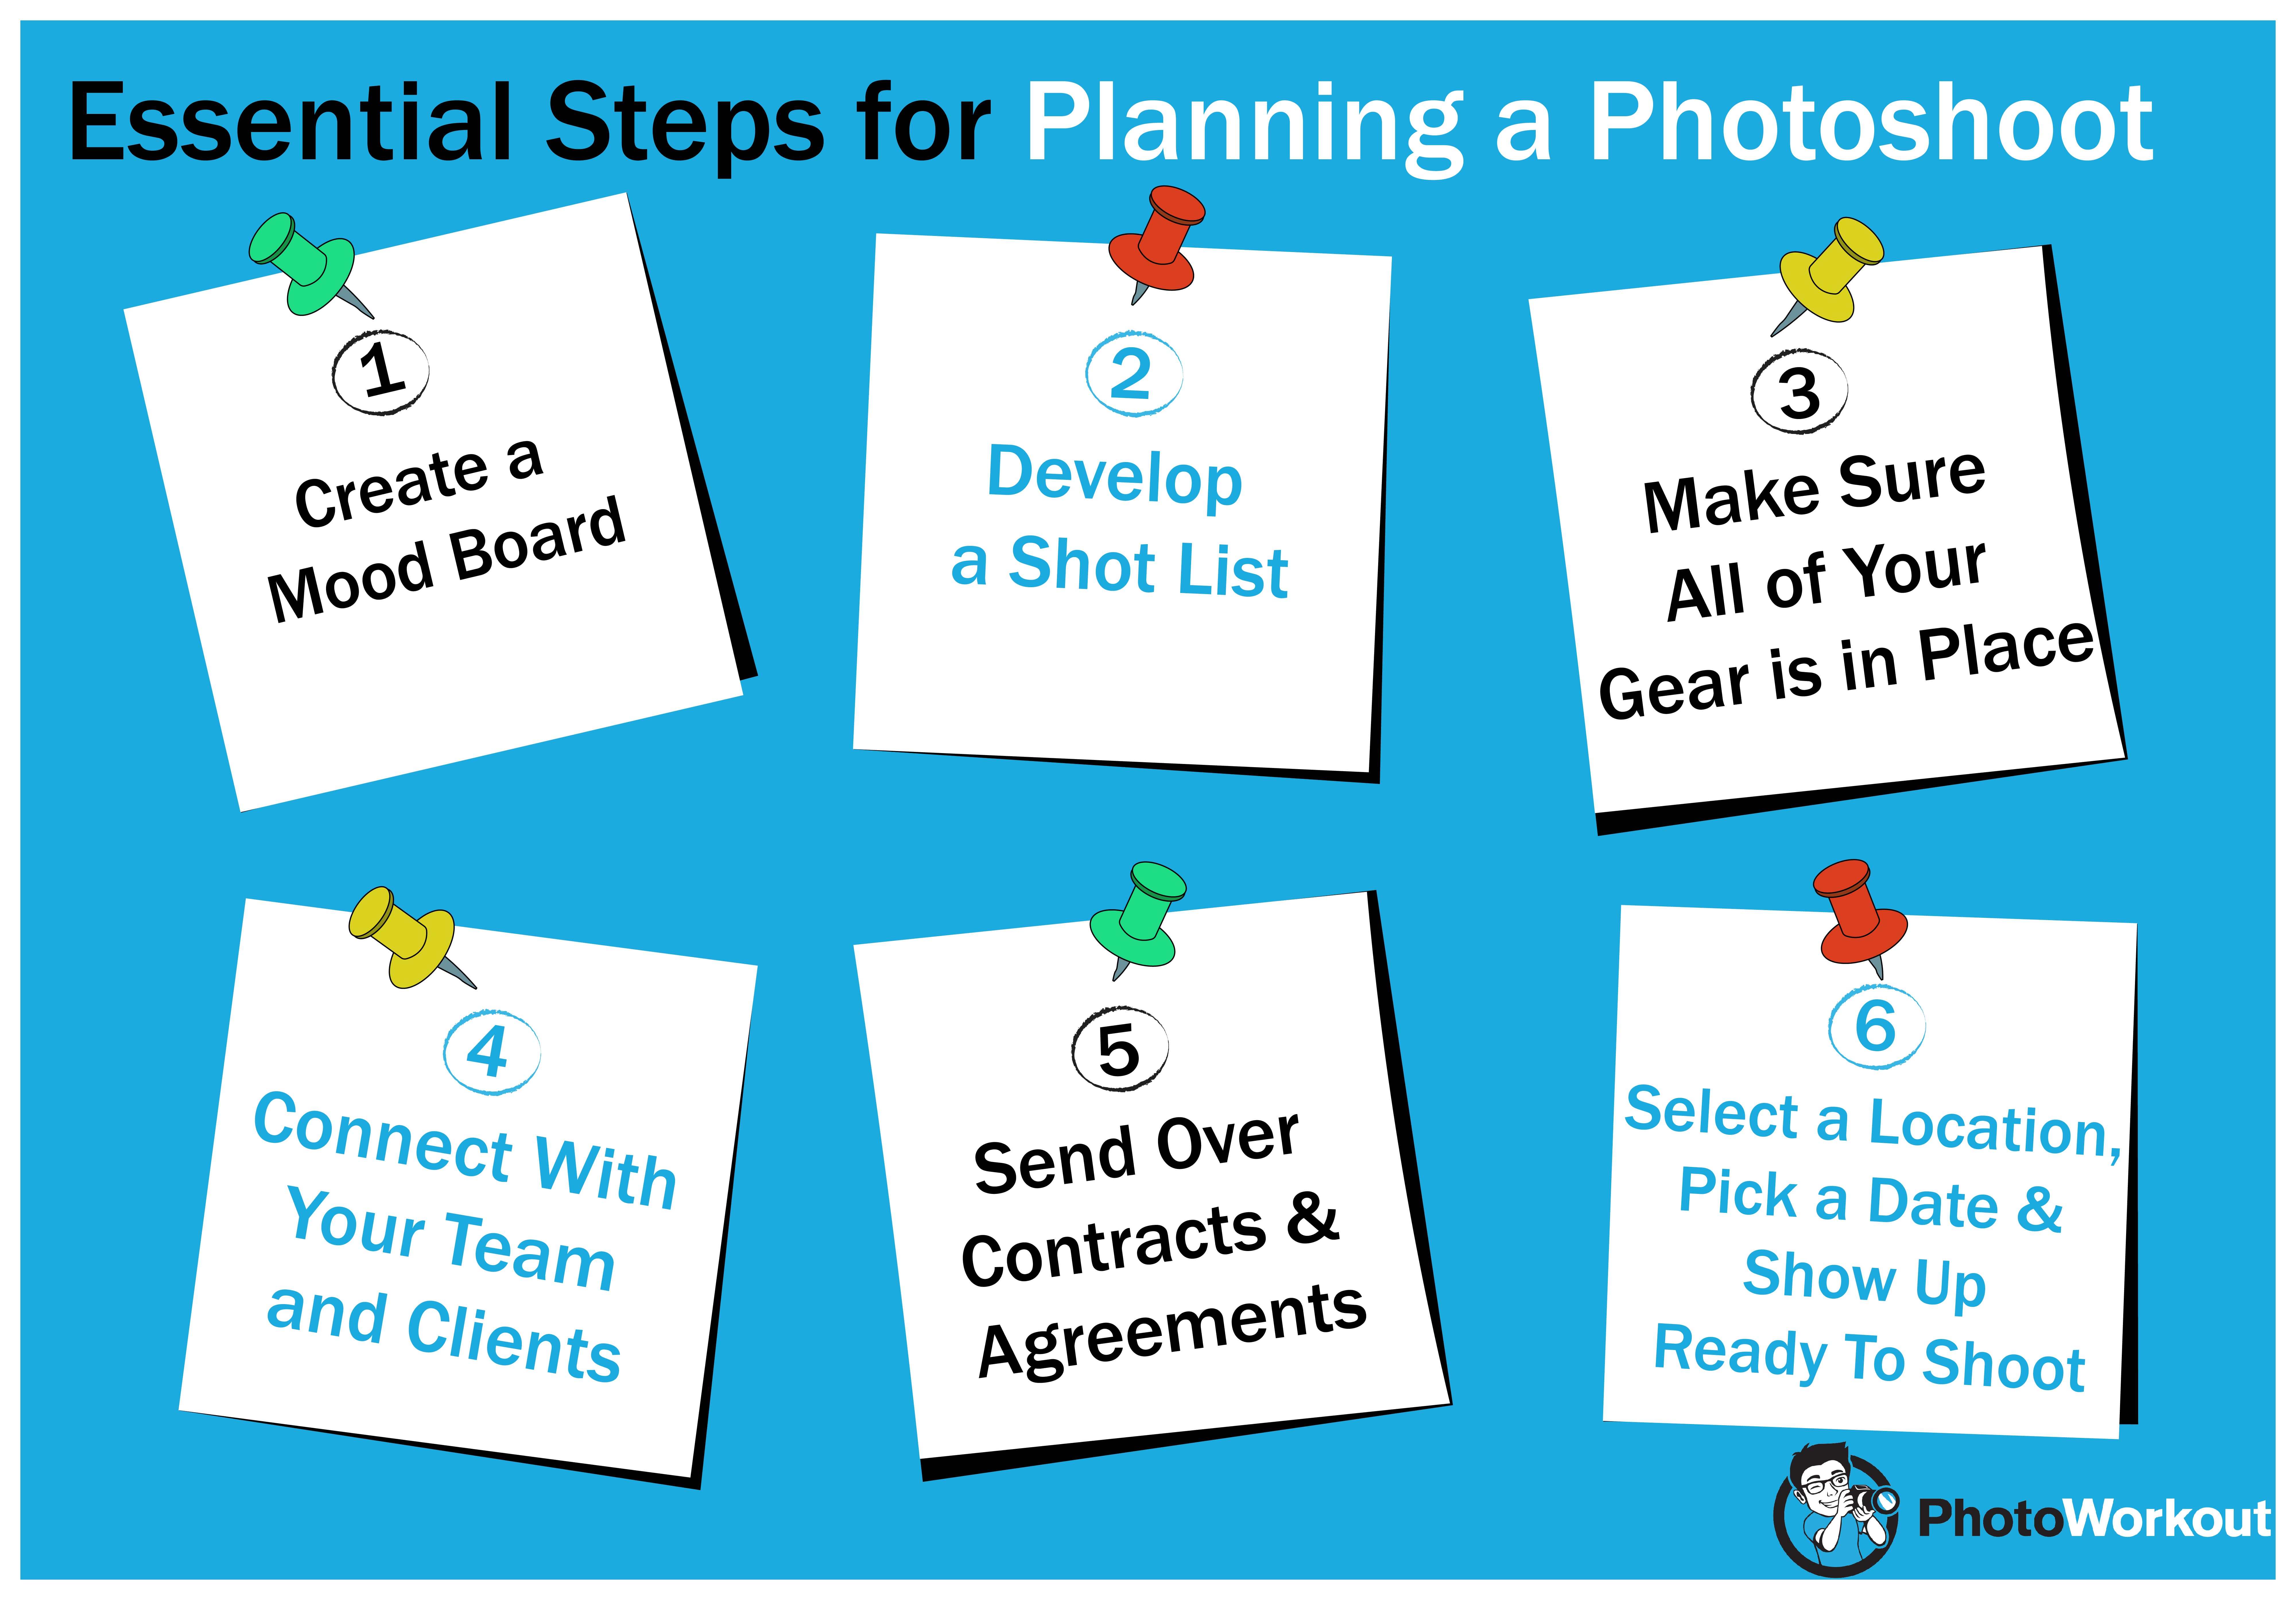 How to Plan a Photoshoot Simple Tips to Make Your Shoot Smooth!